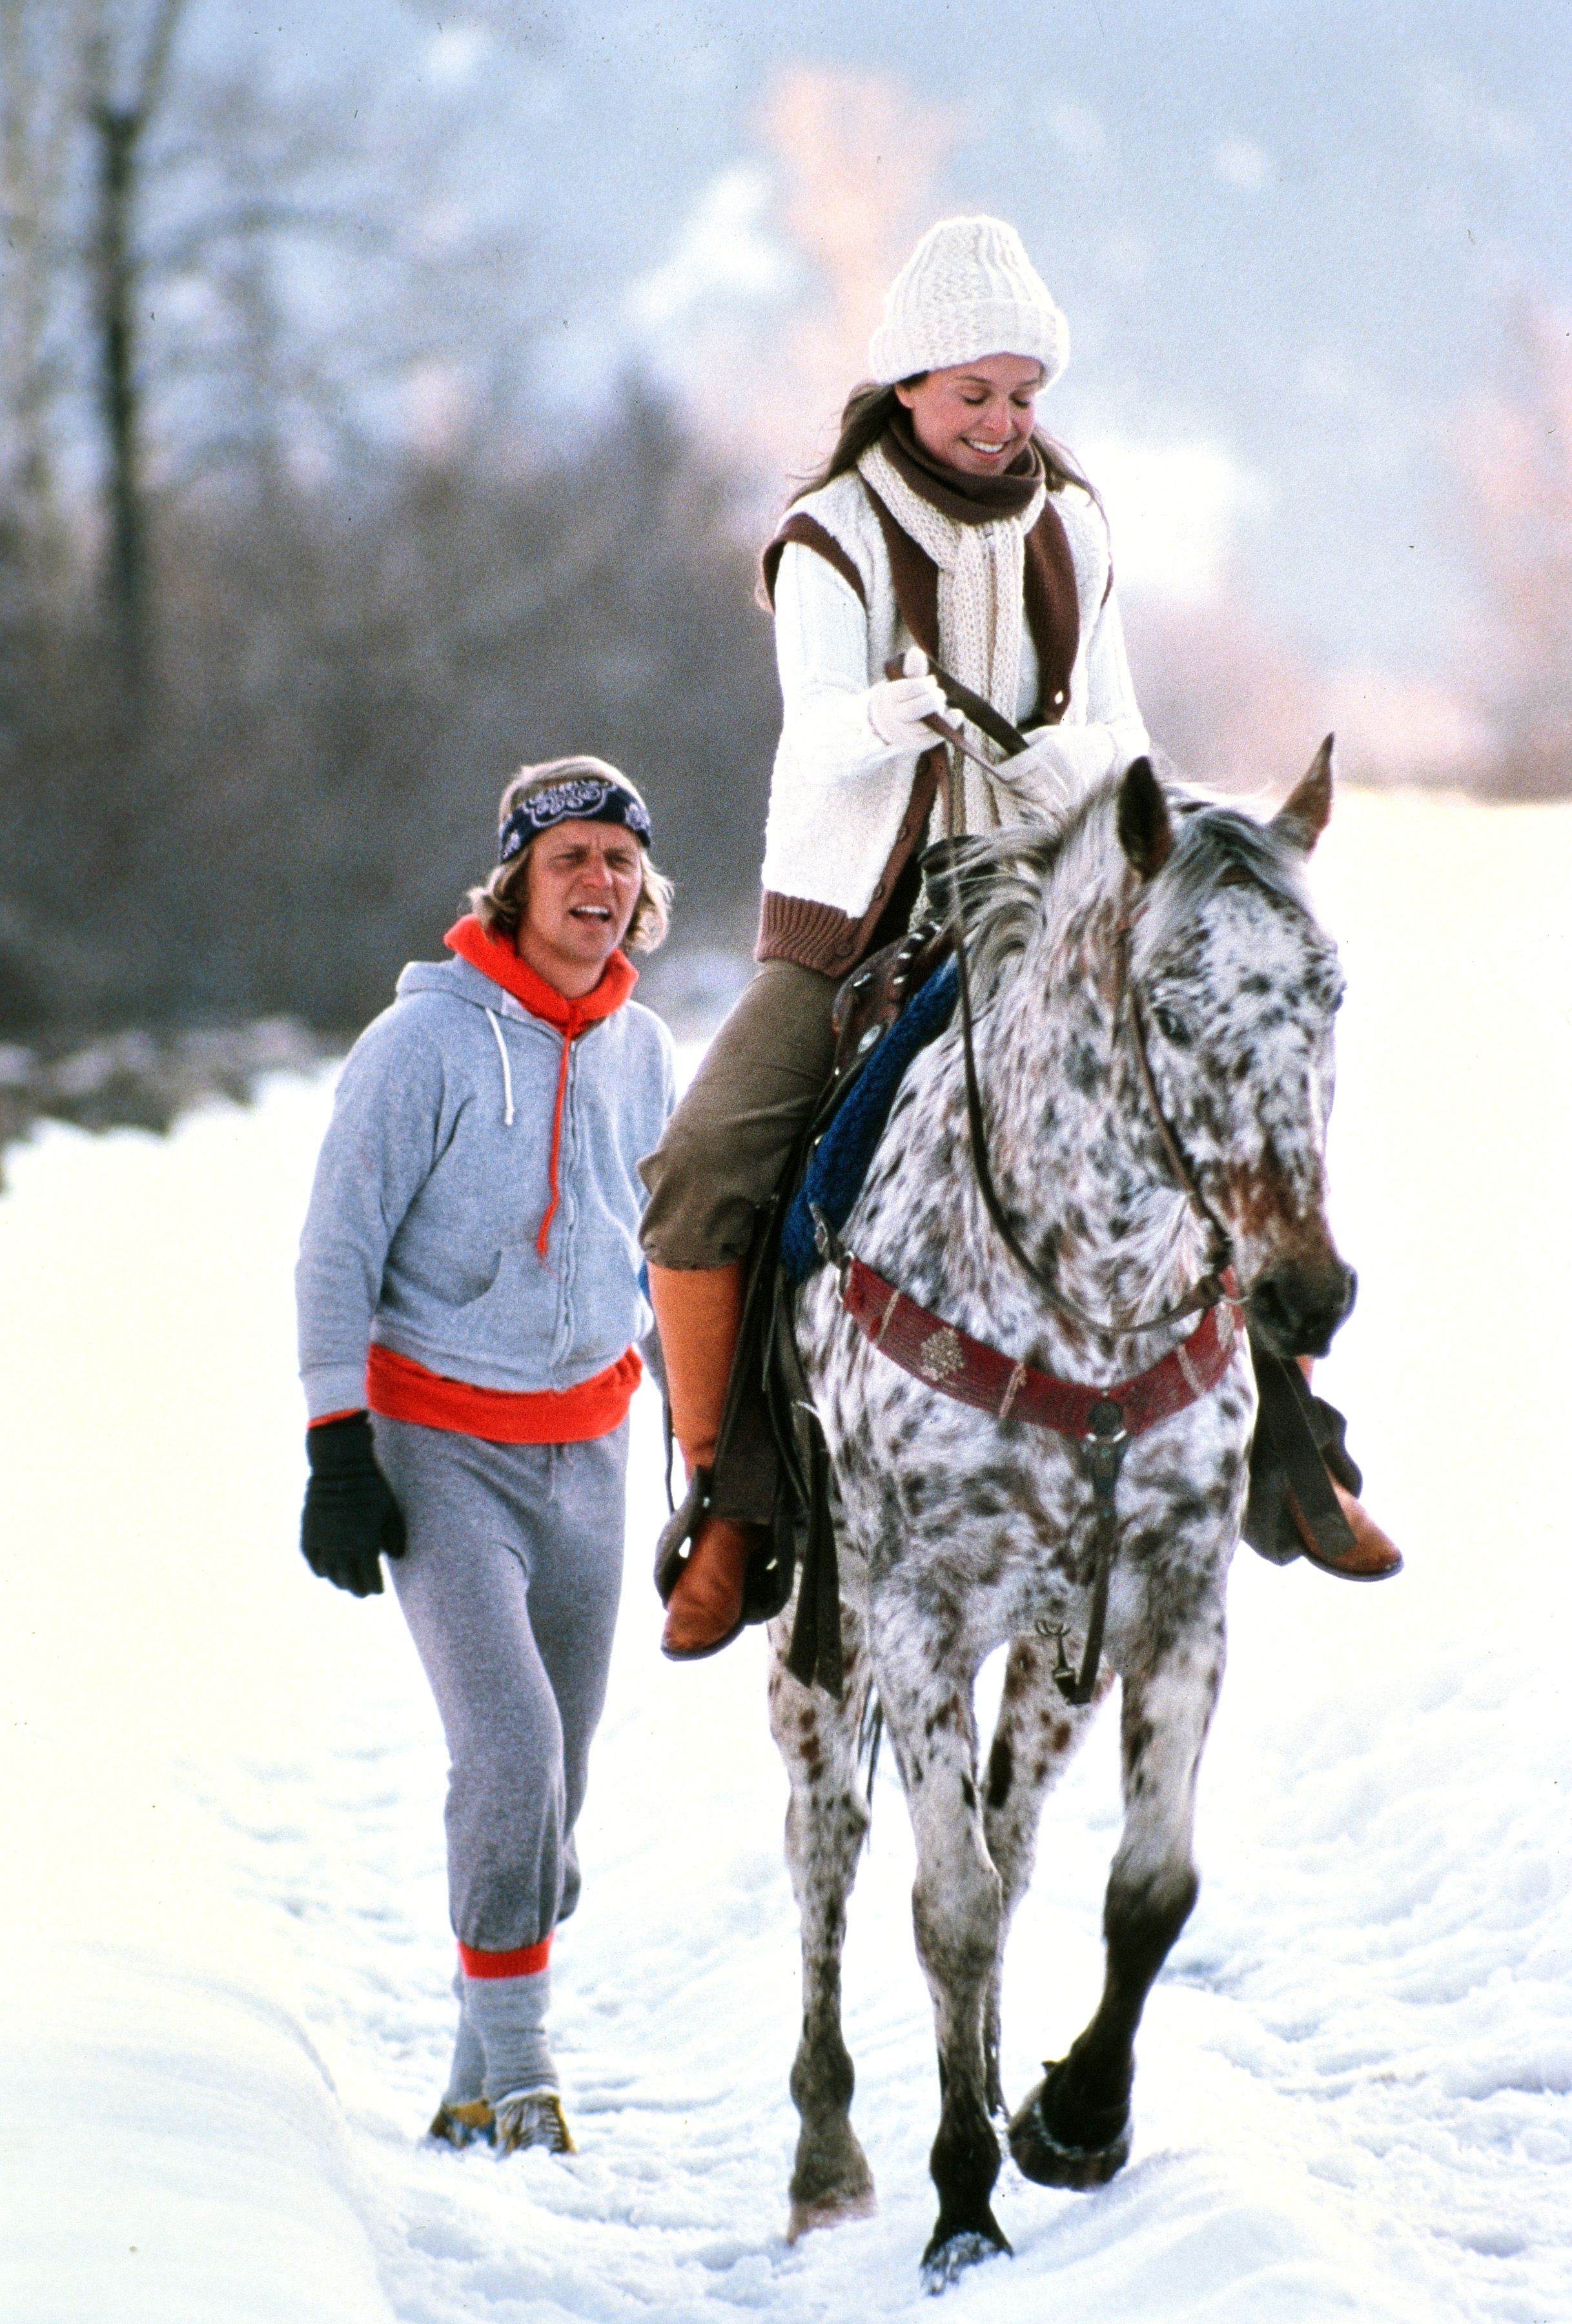 David Soul and Jill Eikenberry in a movie about a champion skier on March 27, 1981 in Sun Valley, Idaho | Source: Getty Images